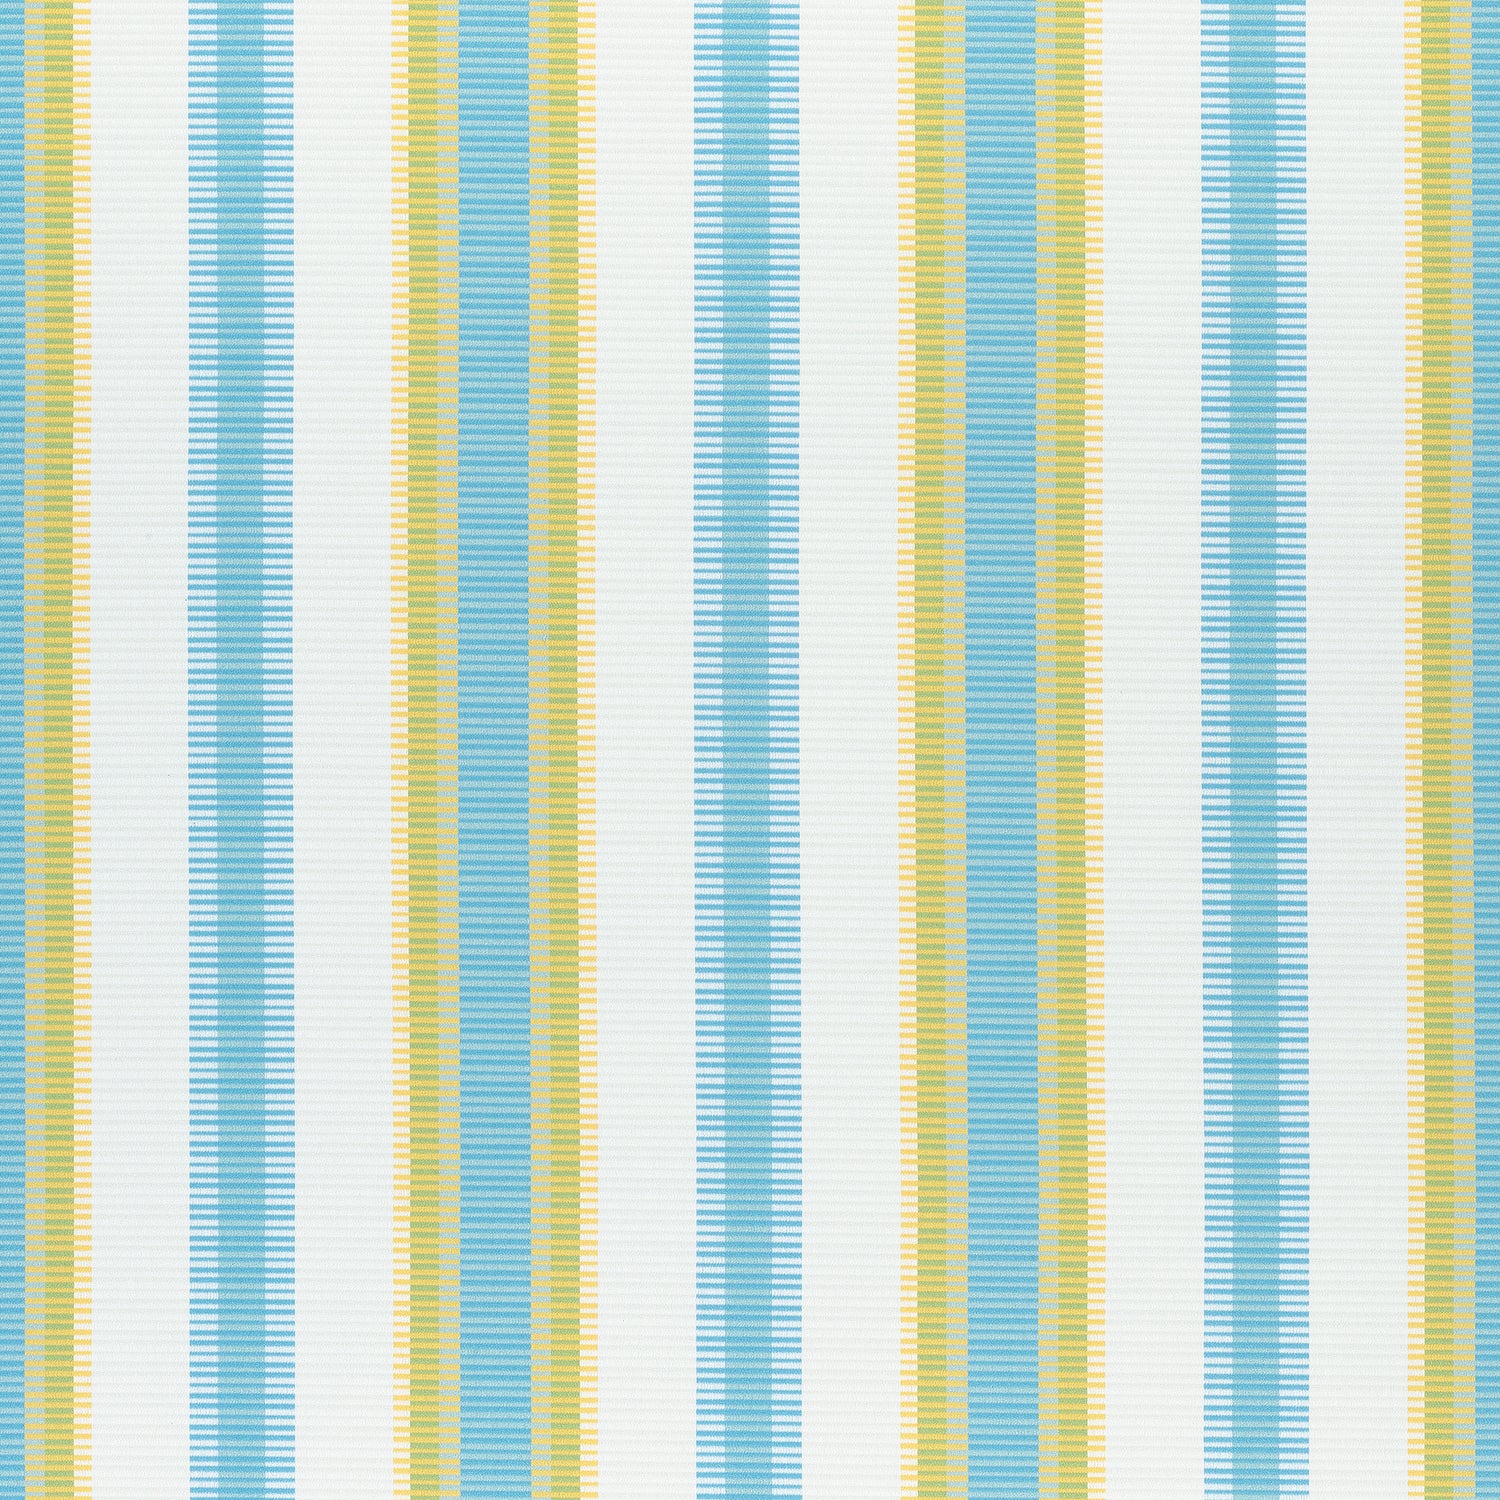 Samba Stripe fabric in sky and sunshine color - pattern number W74671 - by Thibaut in the Festival collection